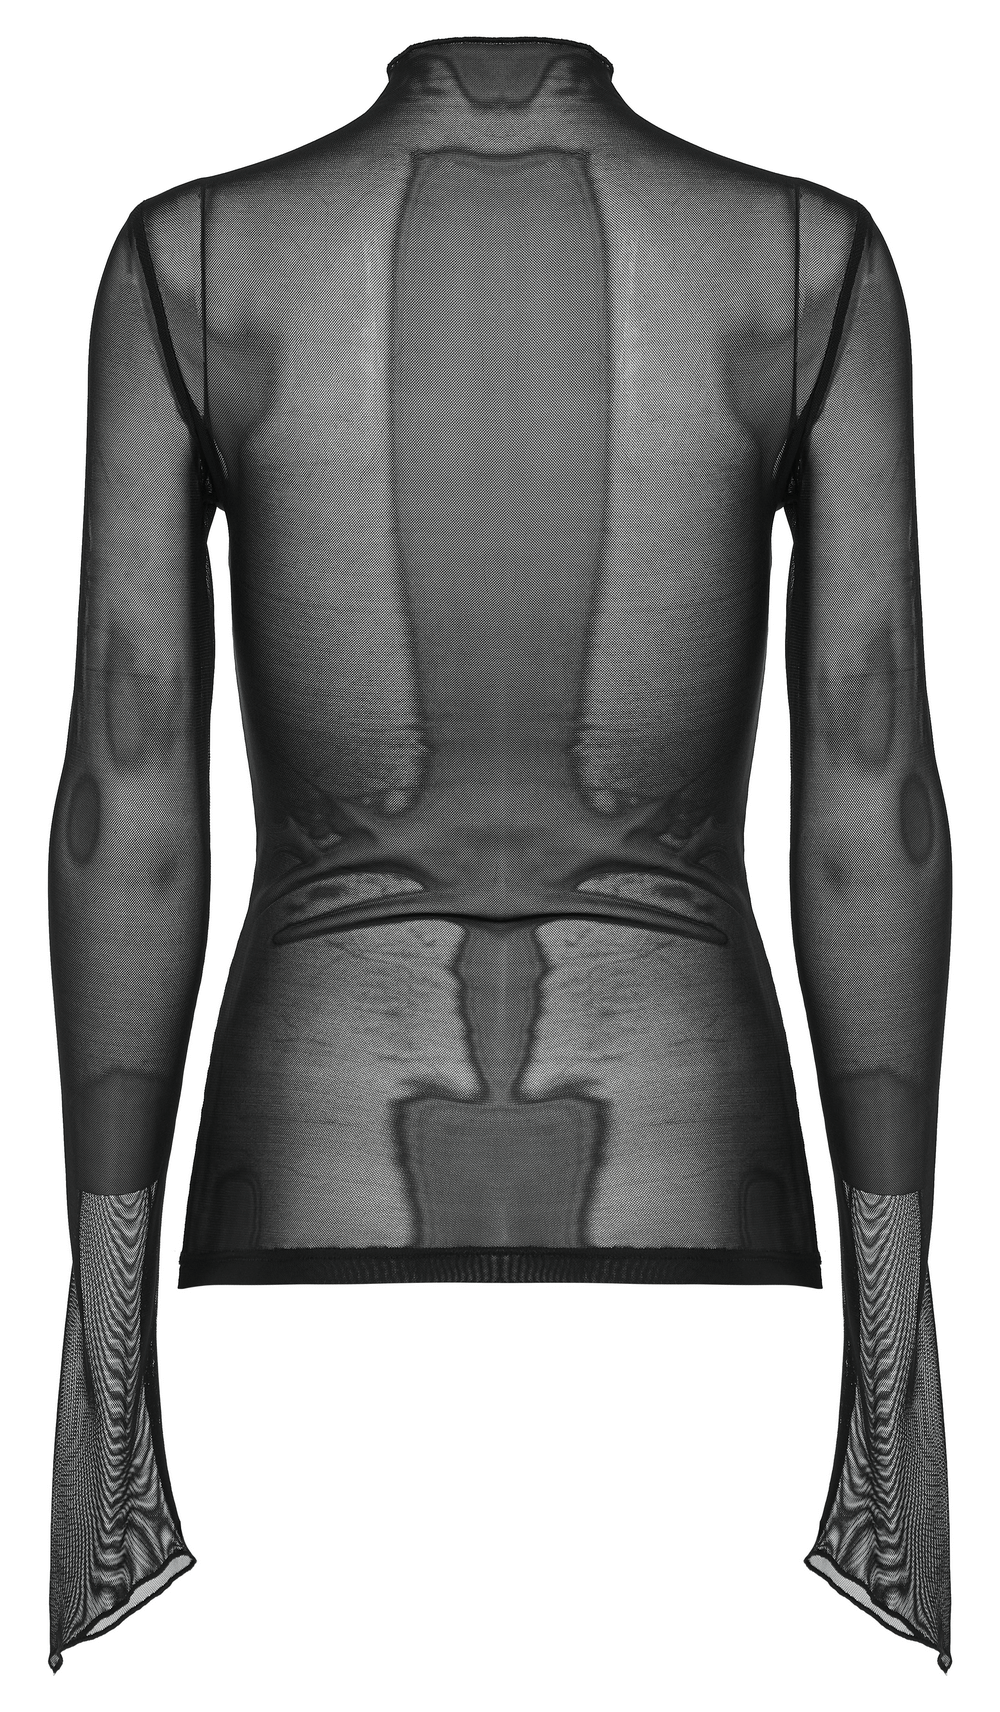 Sultry Flocked Cross Goth Mesh Top for Edgy Appeal - HARD'N'HEAVY